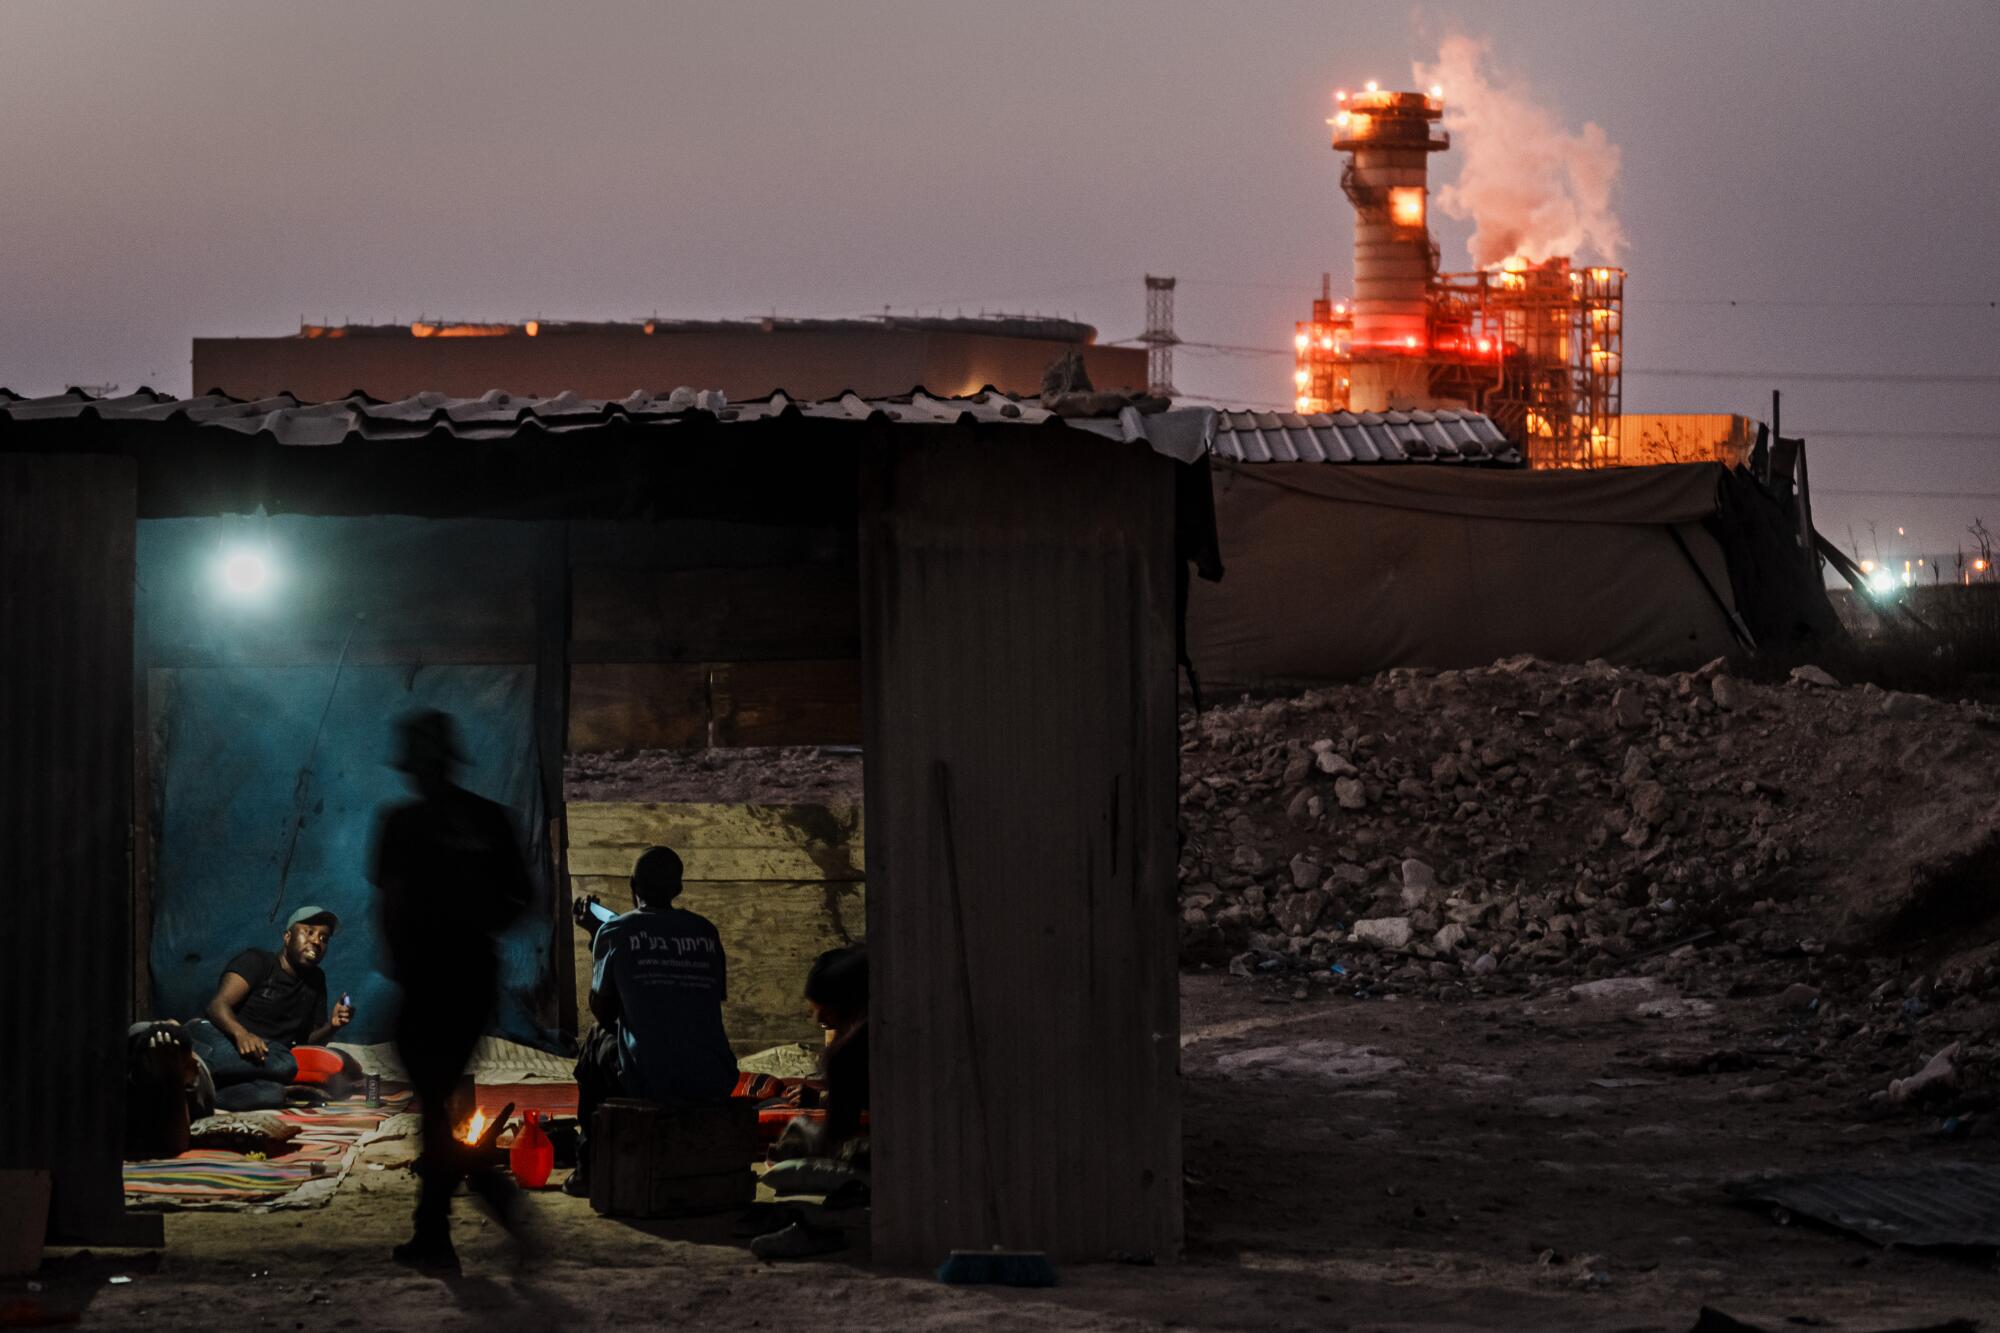  People shelter under a structure with a roof and open sides. A power plant glows and spews smoke in the distance 